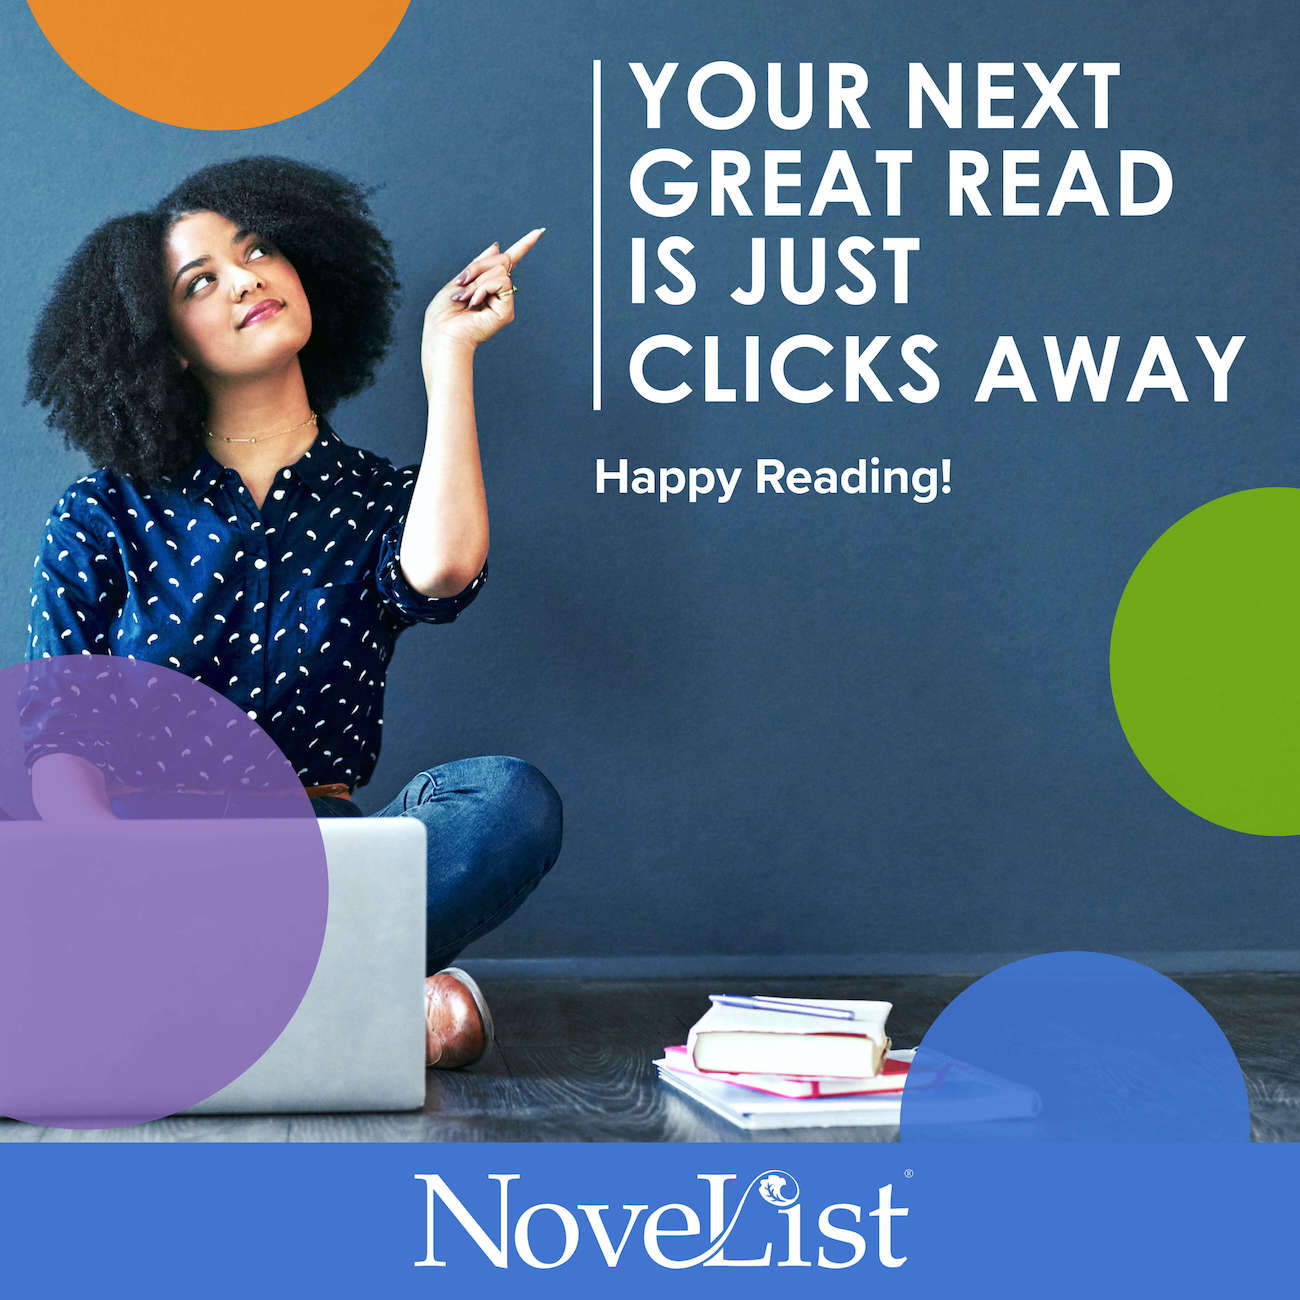 A woman with black hair, wearing a dark blue shirt with white checks shirt, jeans and light brown boots. She is sitting cross legged on the floor with a stack of books and her laptop. She is pointing to the words "Your next great read is just clicks away Happy Reading!" The image has four color dots and the words "Novelist" written in white at the bottom of the image.